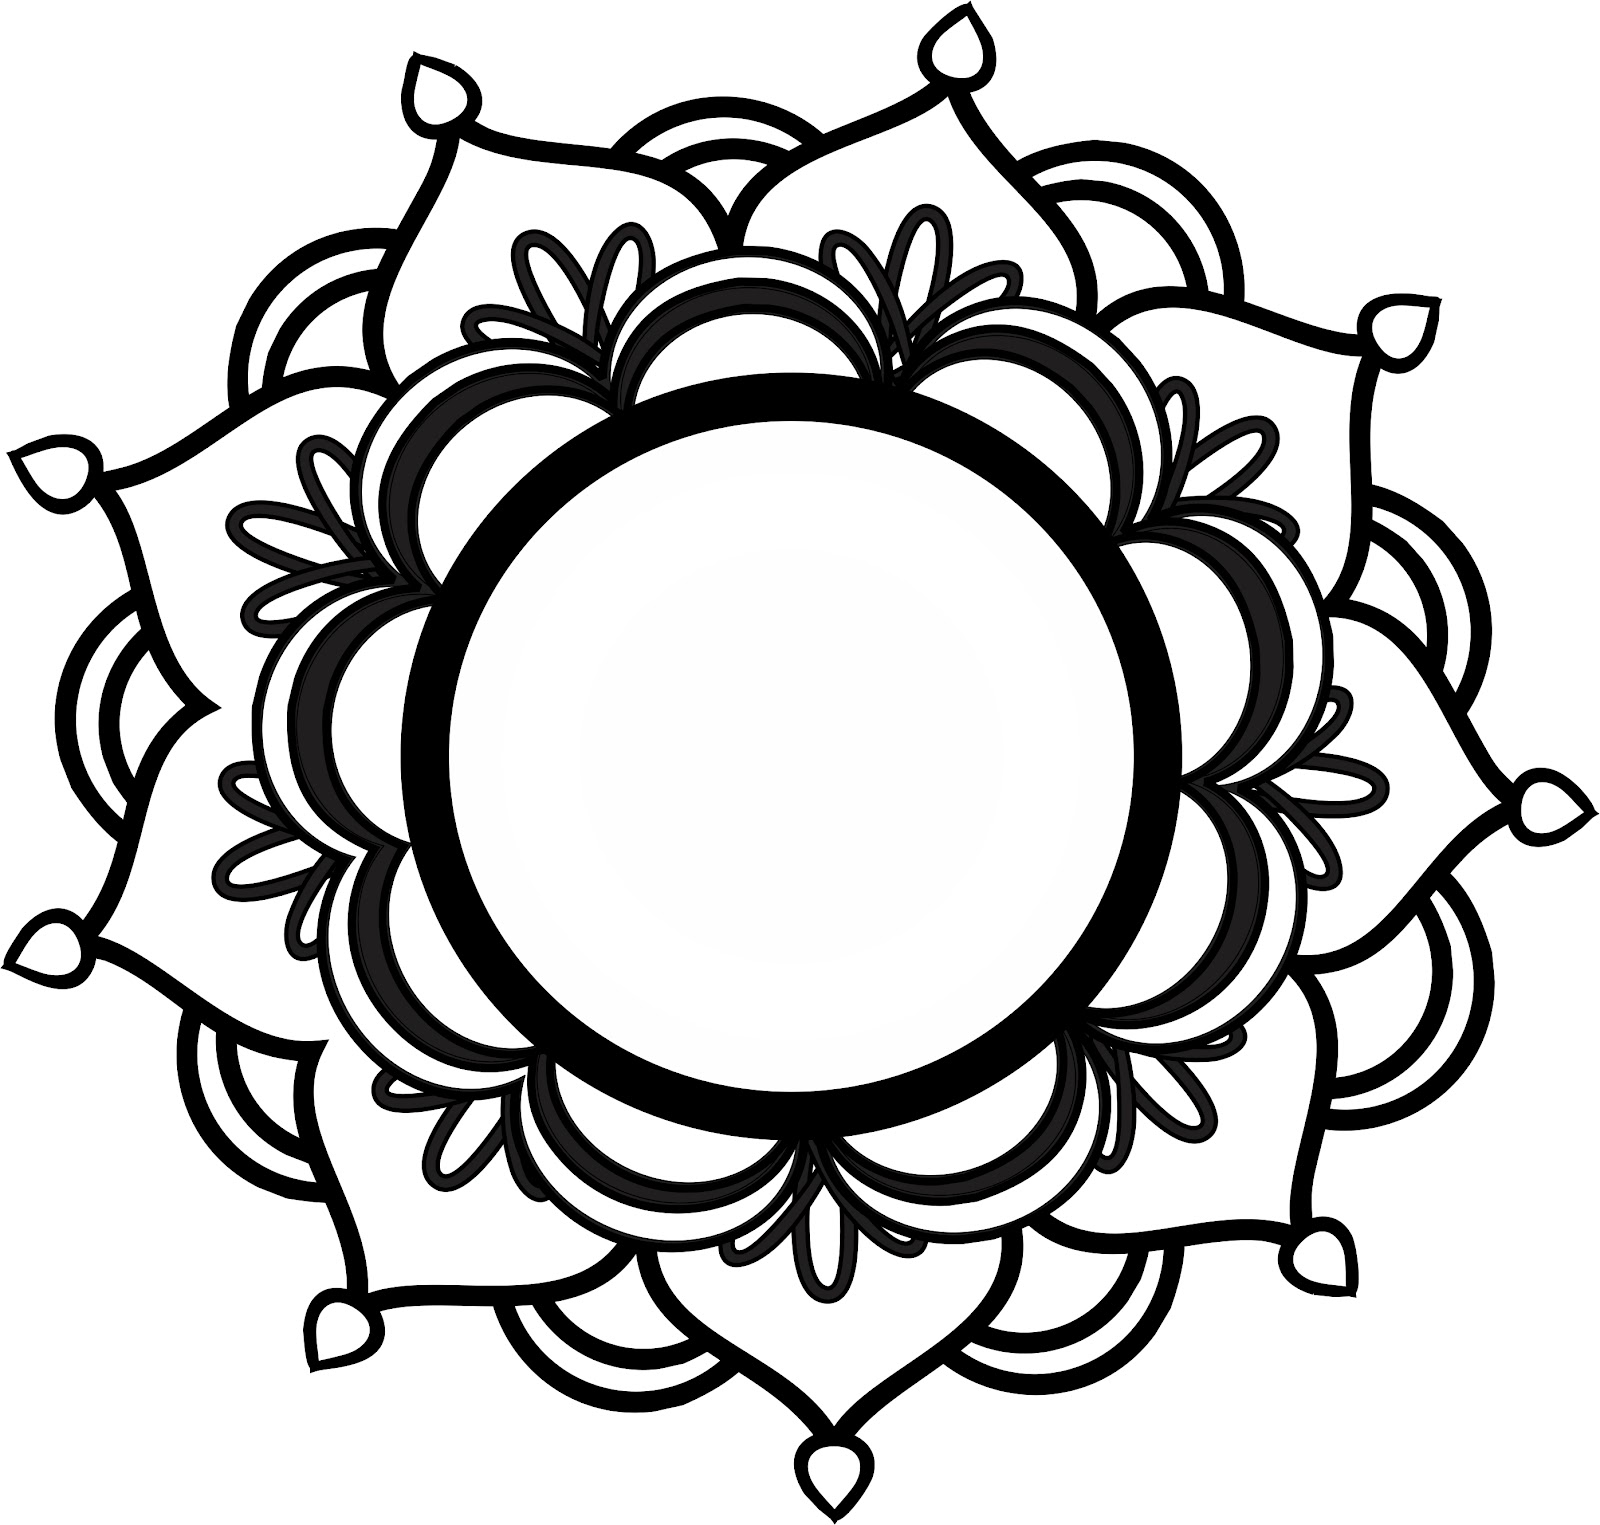 easy flower mandala coloring pages | Free Coloring Pages